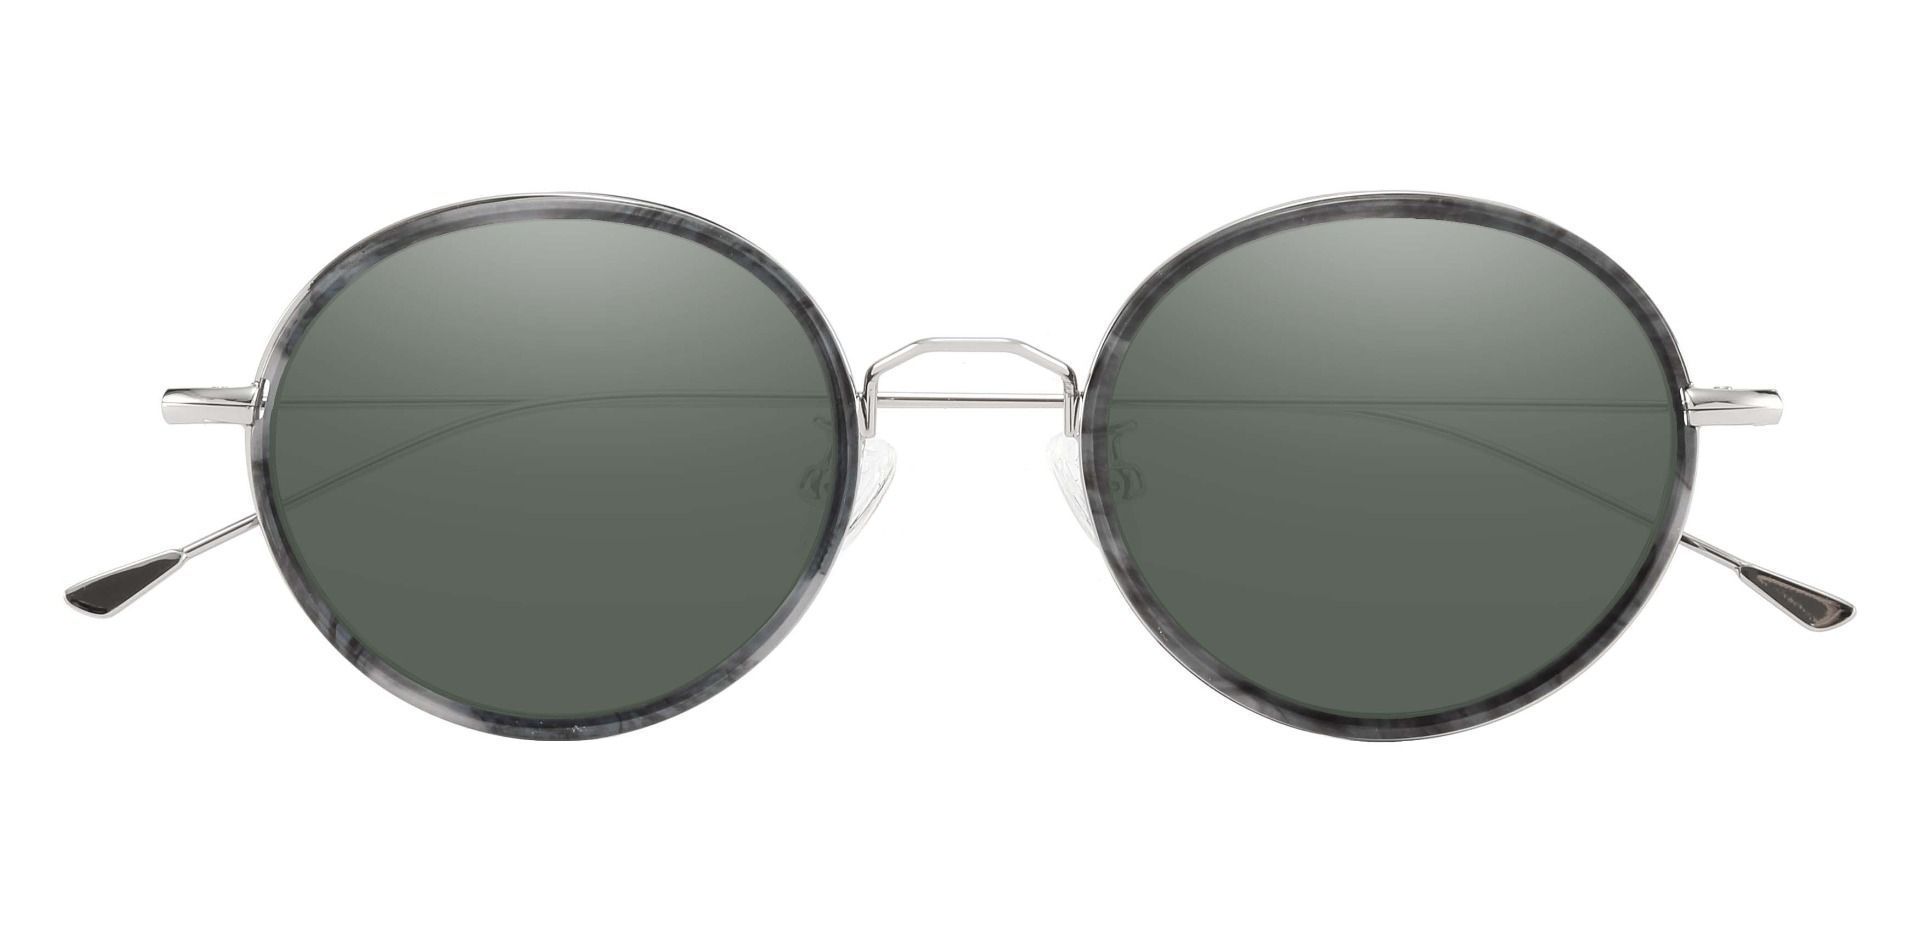 Malverne Oval Lined Bifocal Sunglasses - Gray Frame With Green Lenses